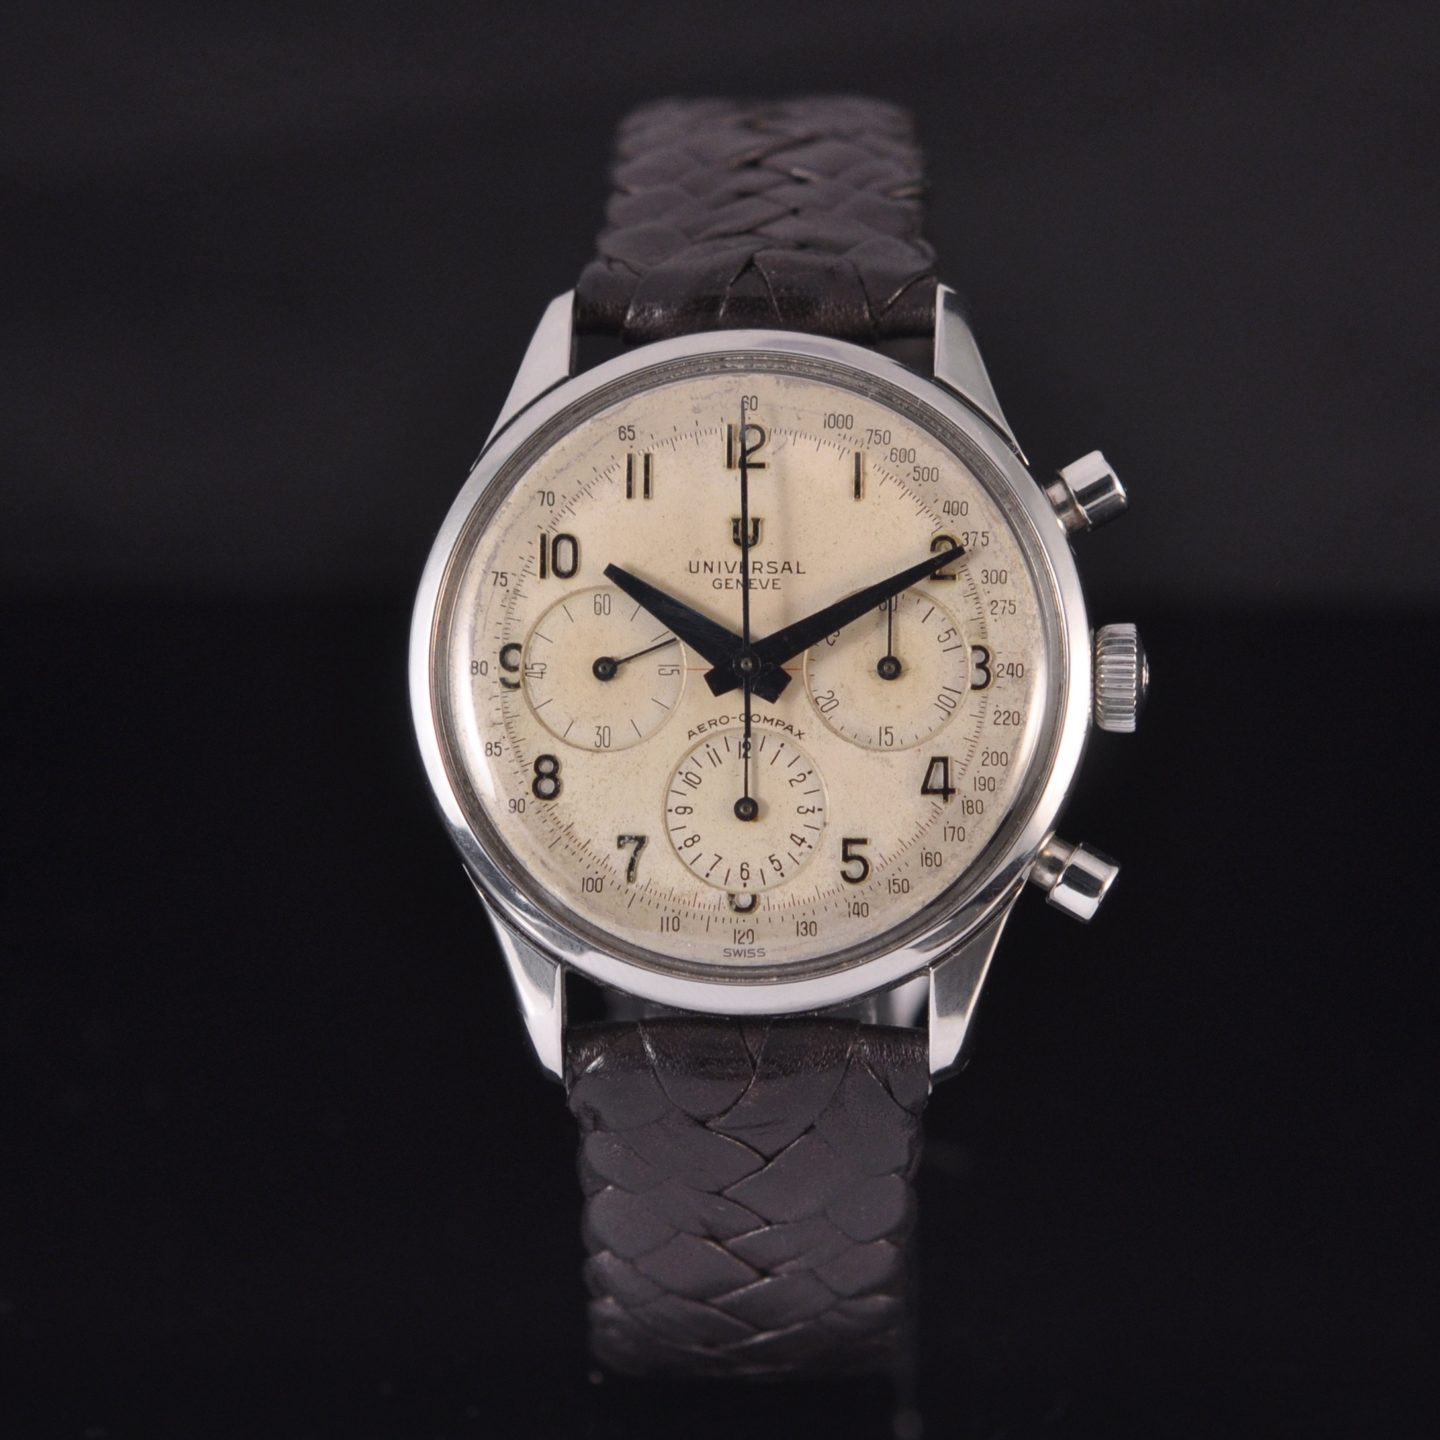 Universal Geneve Aero-Compax - Stainless steel, Very good condition